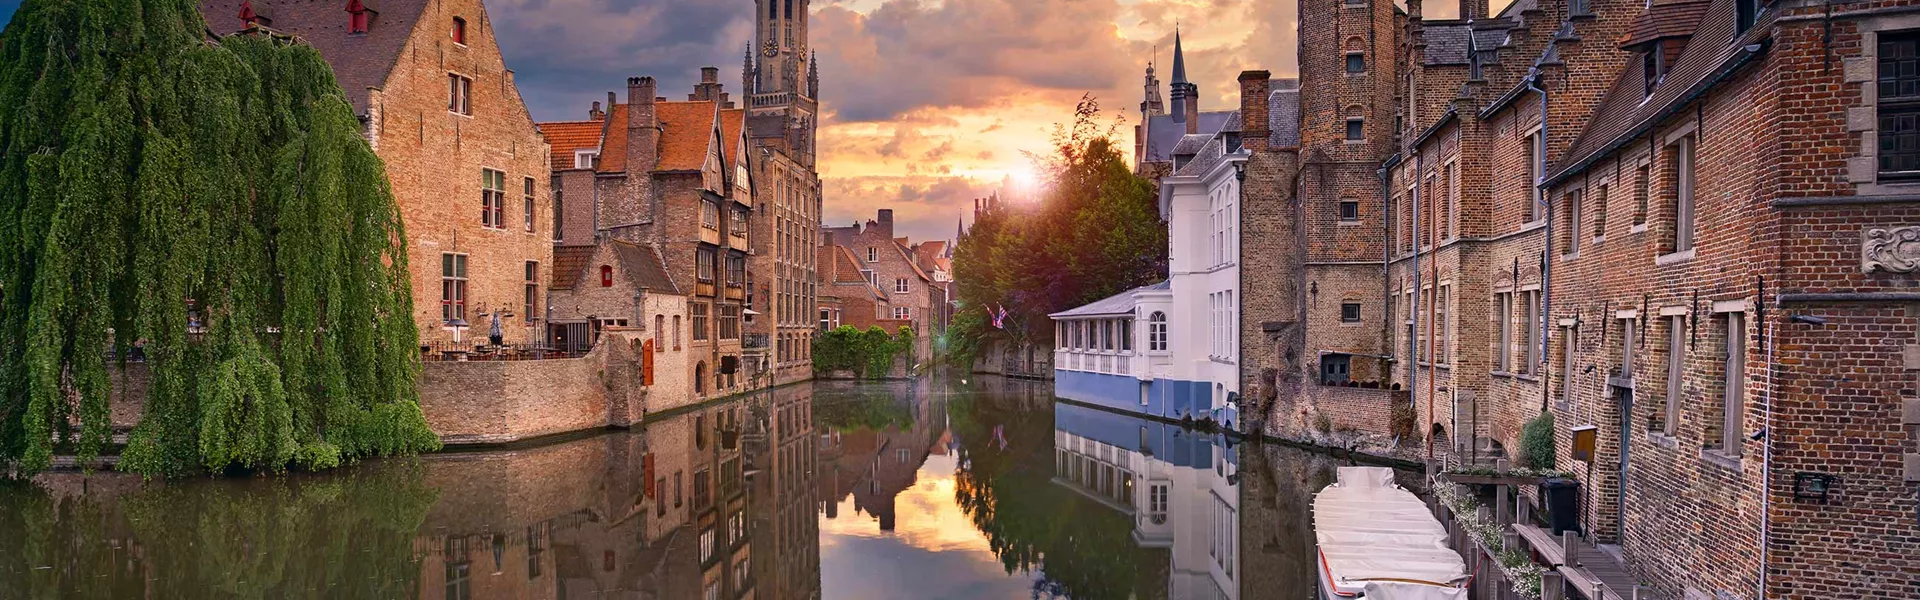 Buildings by a river in Bruges, Belgium